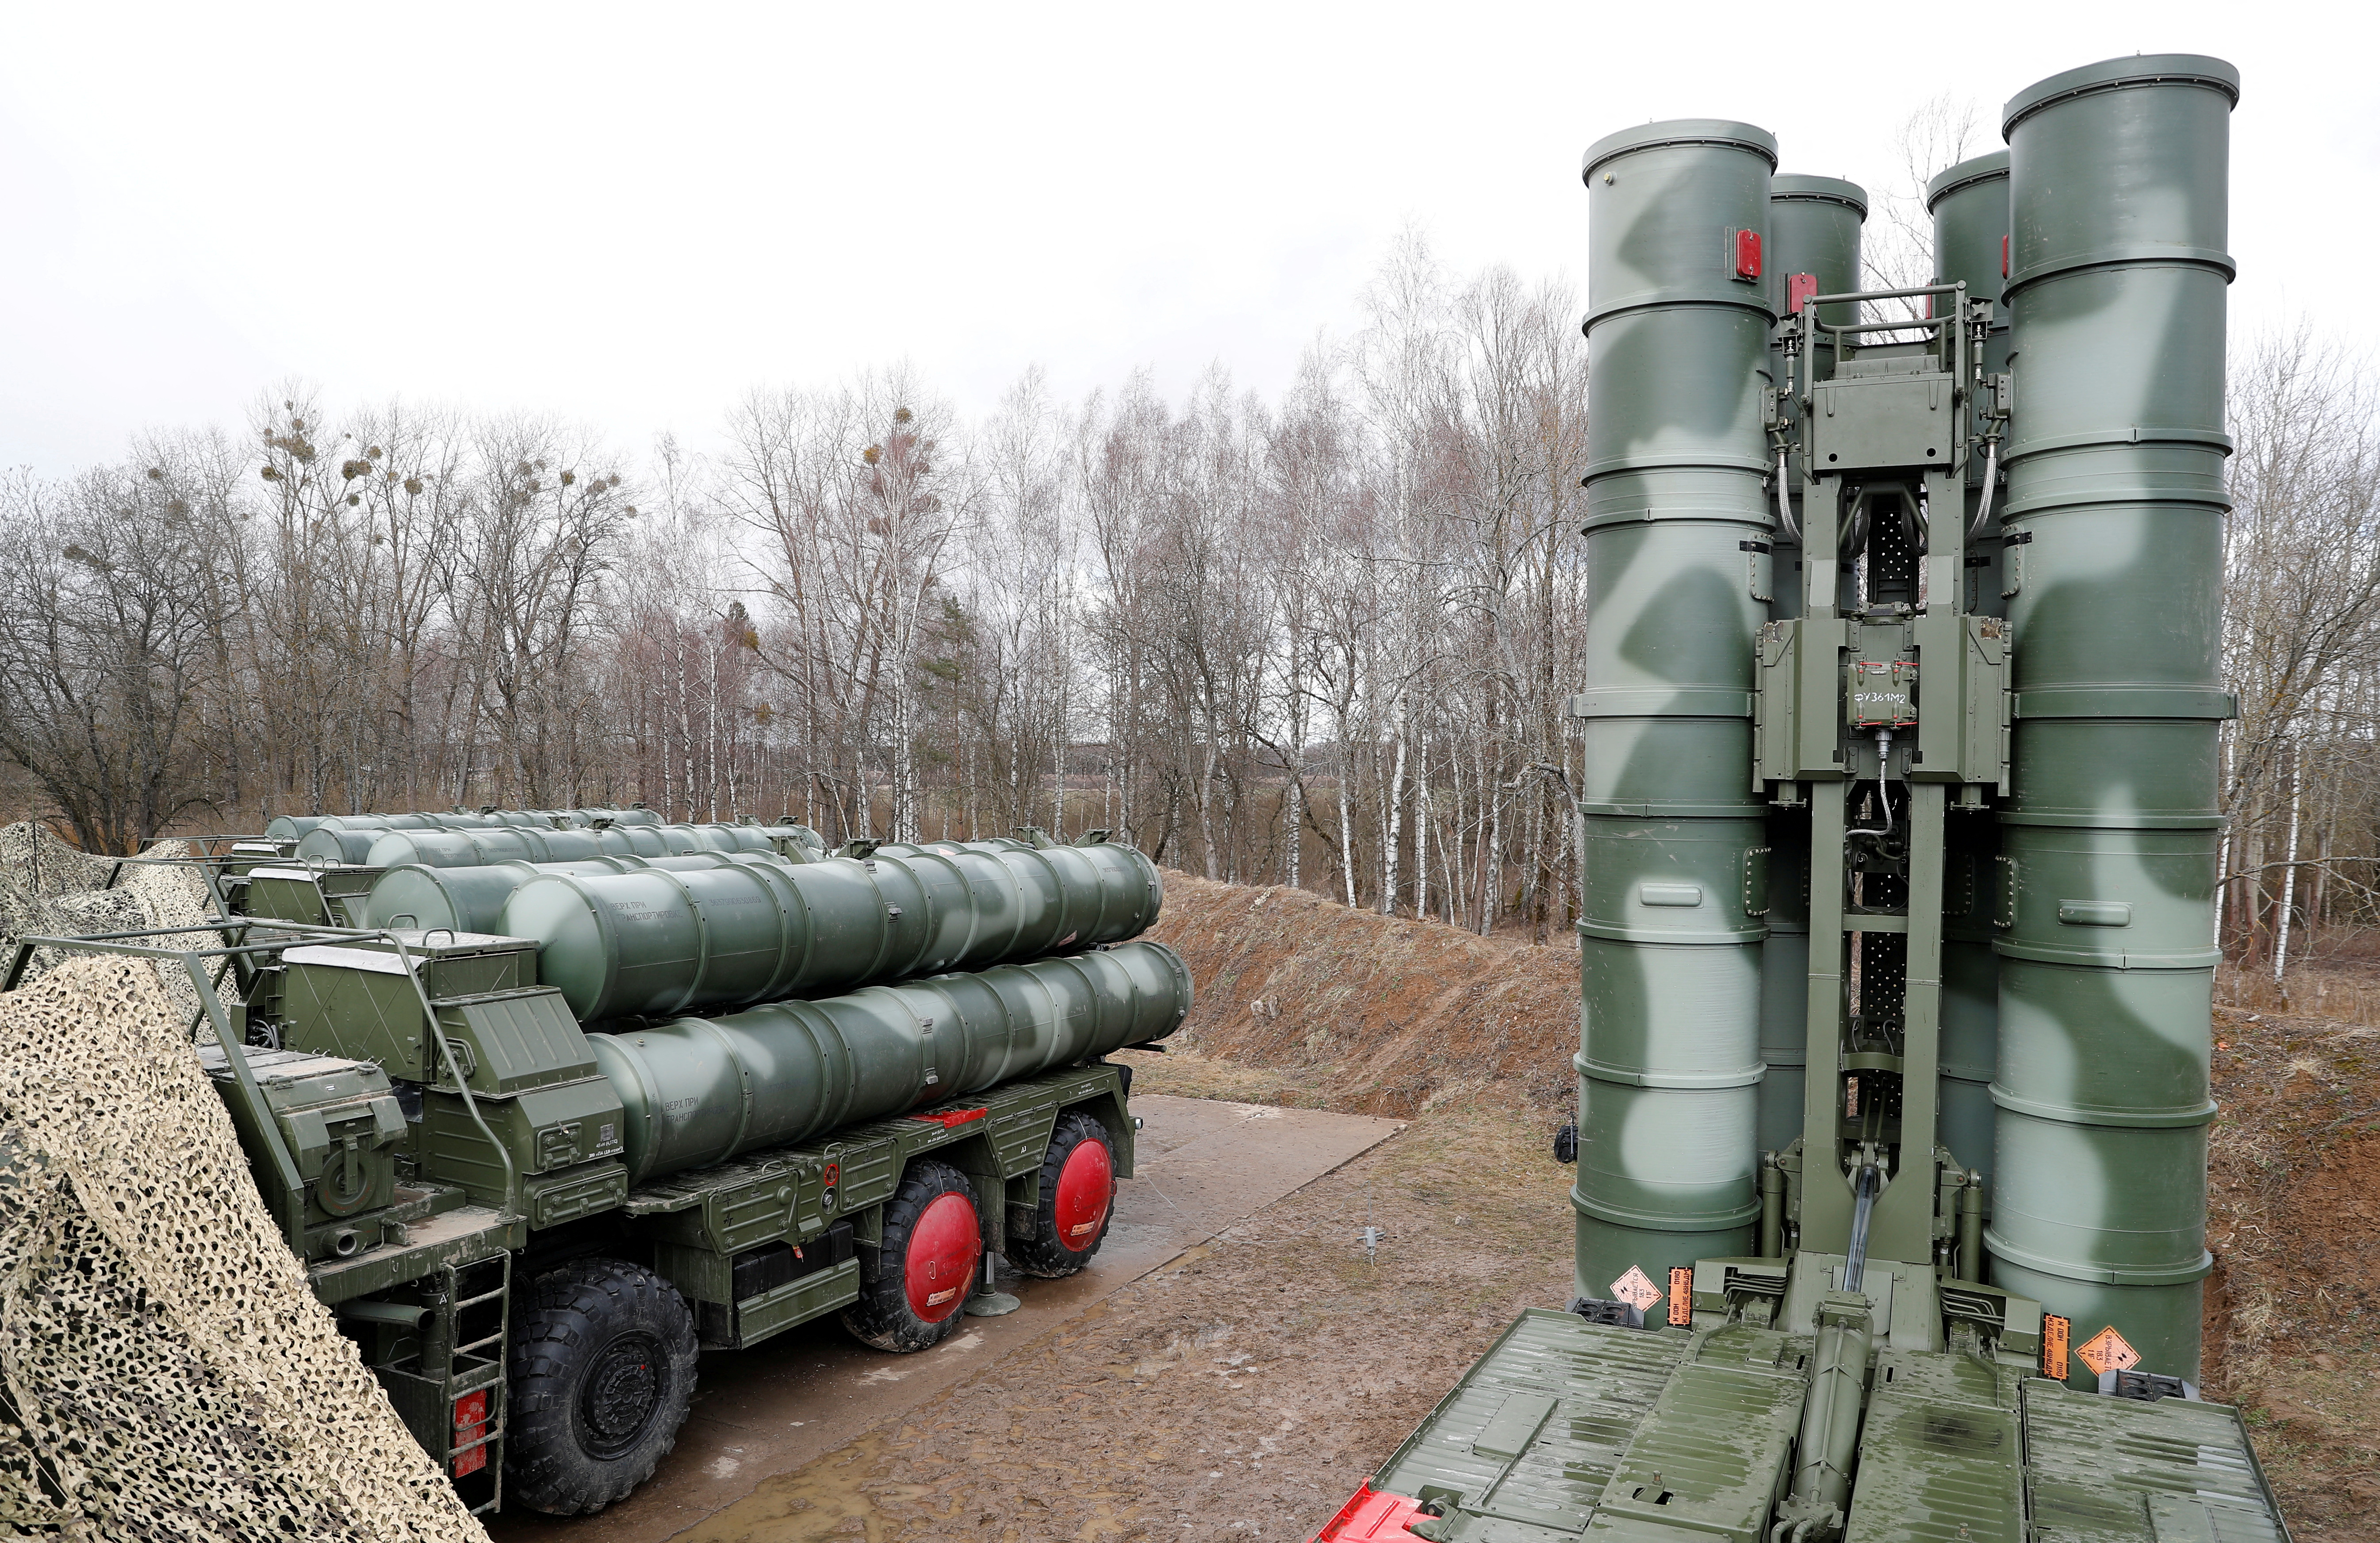 FILE PHOTO: A view shows S-400 surface-to-air missile system after its deployment near Kaliningrad